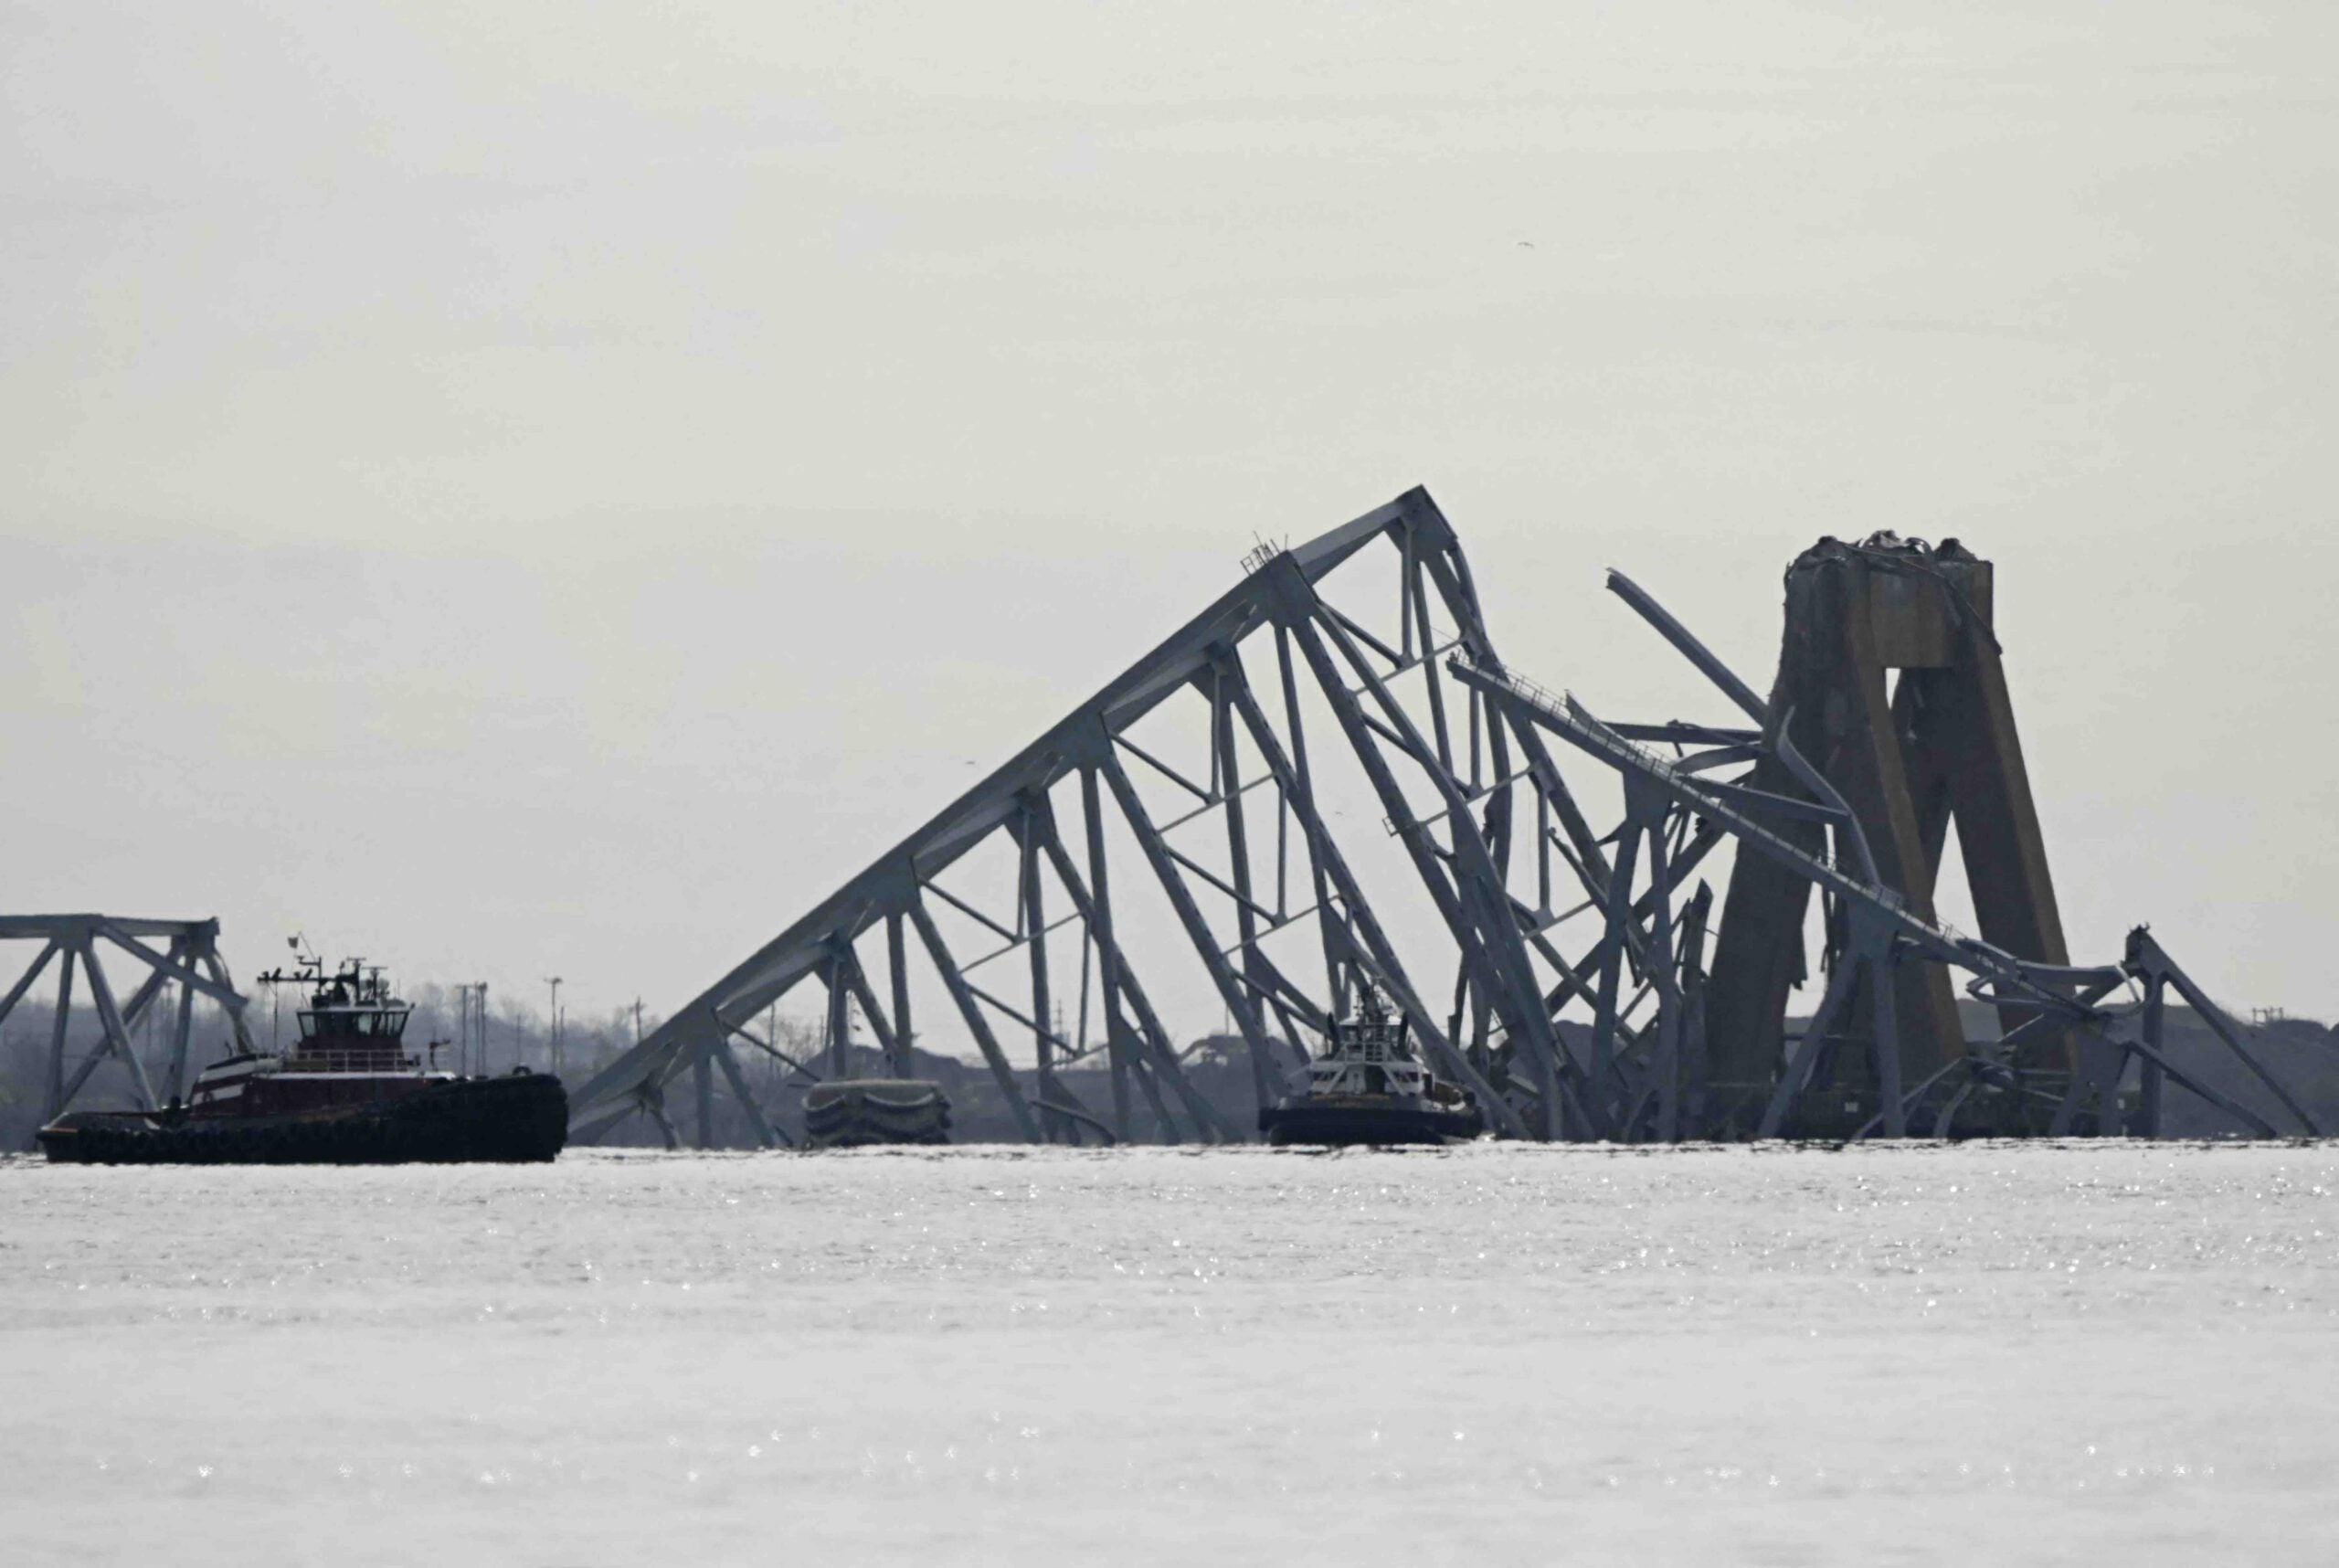 The steel frame of the Francis Scott Key Bridge lies in the water after it collapsed in Baltimore, Maryland, on March 26, 2024. The bridge collapsed early March 26 after being struck by the Singapore-flagged Dali container ship, sending multiple vehicles and people plunging into the frigid harbor below. There was no immediate confirmation of the cause of the disaster, but Baltimore's Police Commissioner Richard Worley said there was "no indication" of terrorism. (Photo by Mandel NGAN / AFP)